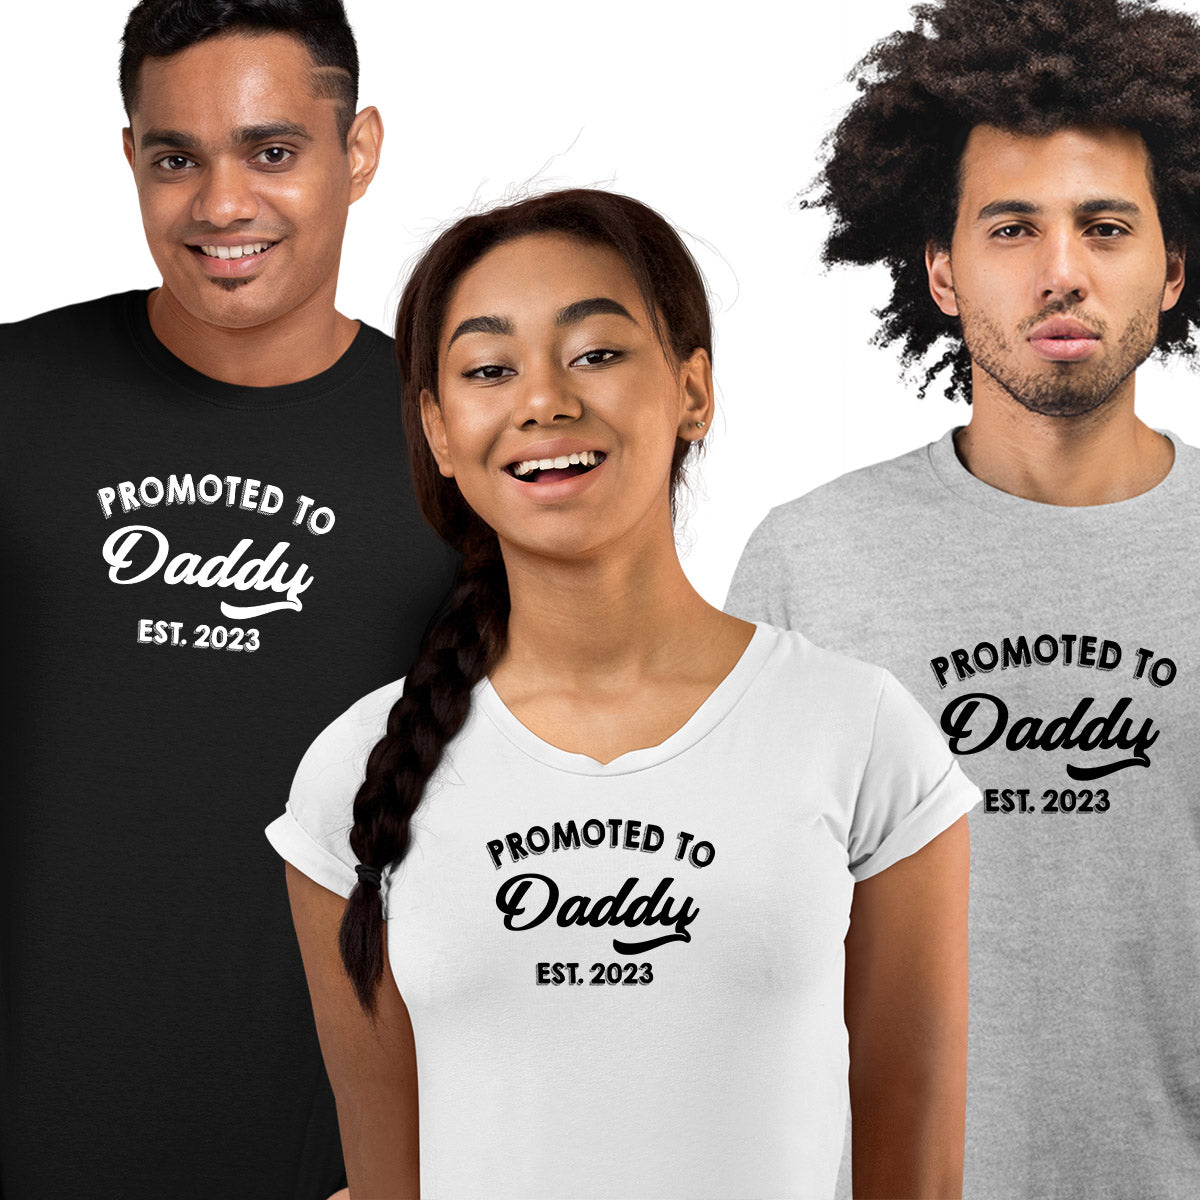 Promoted to Daddy 2023 T-Shirt Funny Humor New Dad Baby First Time